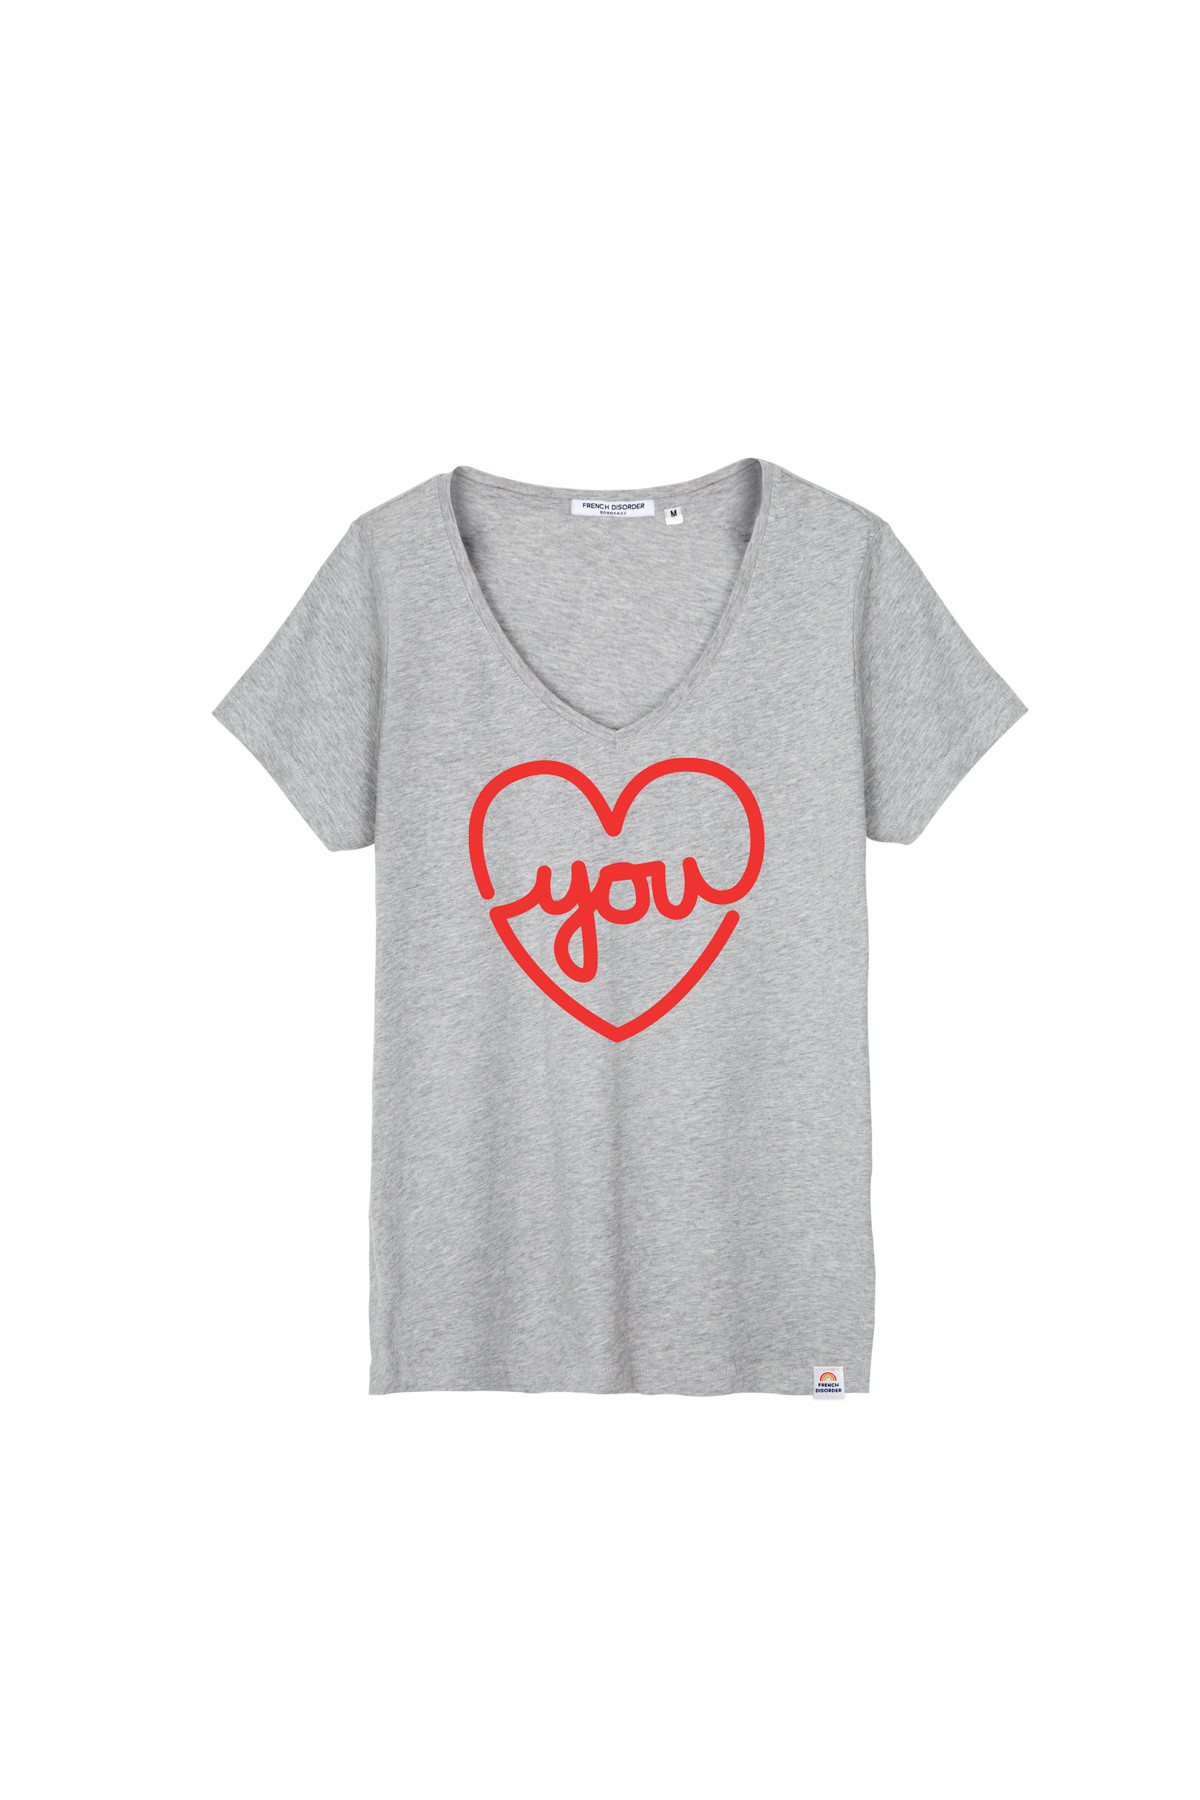 T-shirt Dolly LOVE YOU